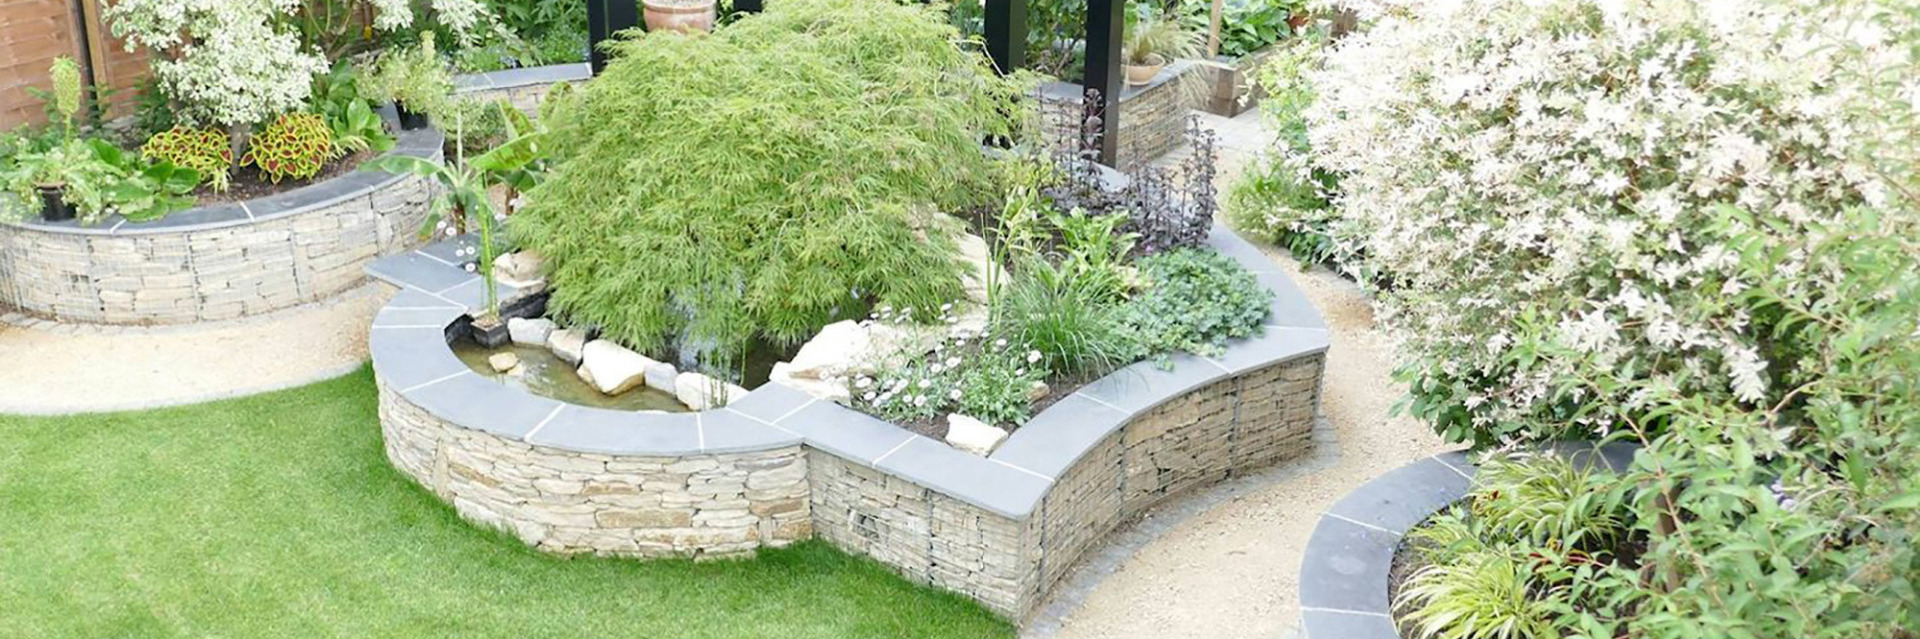 Garden design in St Albans, Hertfordshire with gabion retaining walls and a steel pergola.